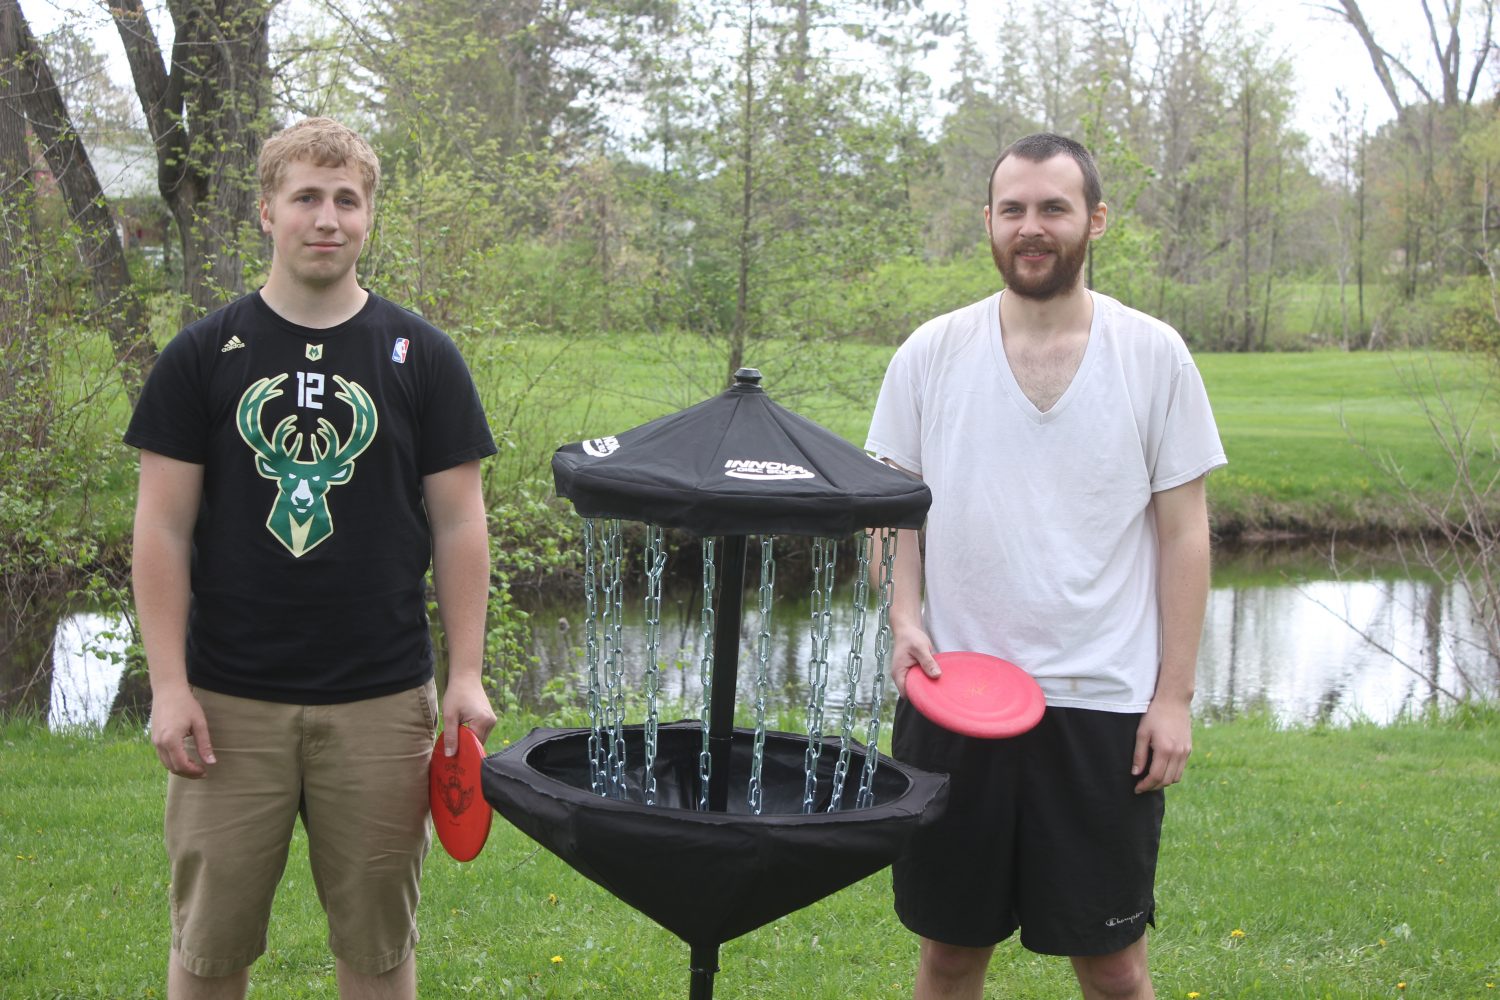 Donations sought for new disc golf course in Merrill